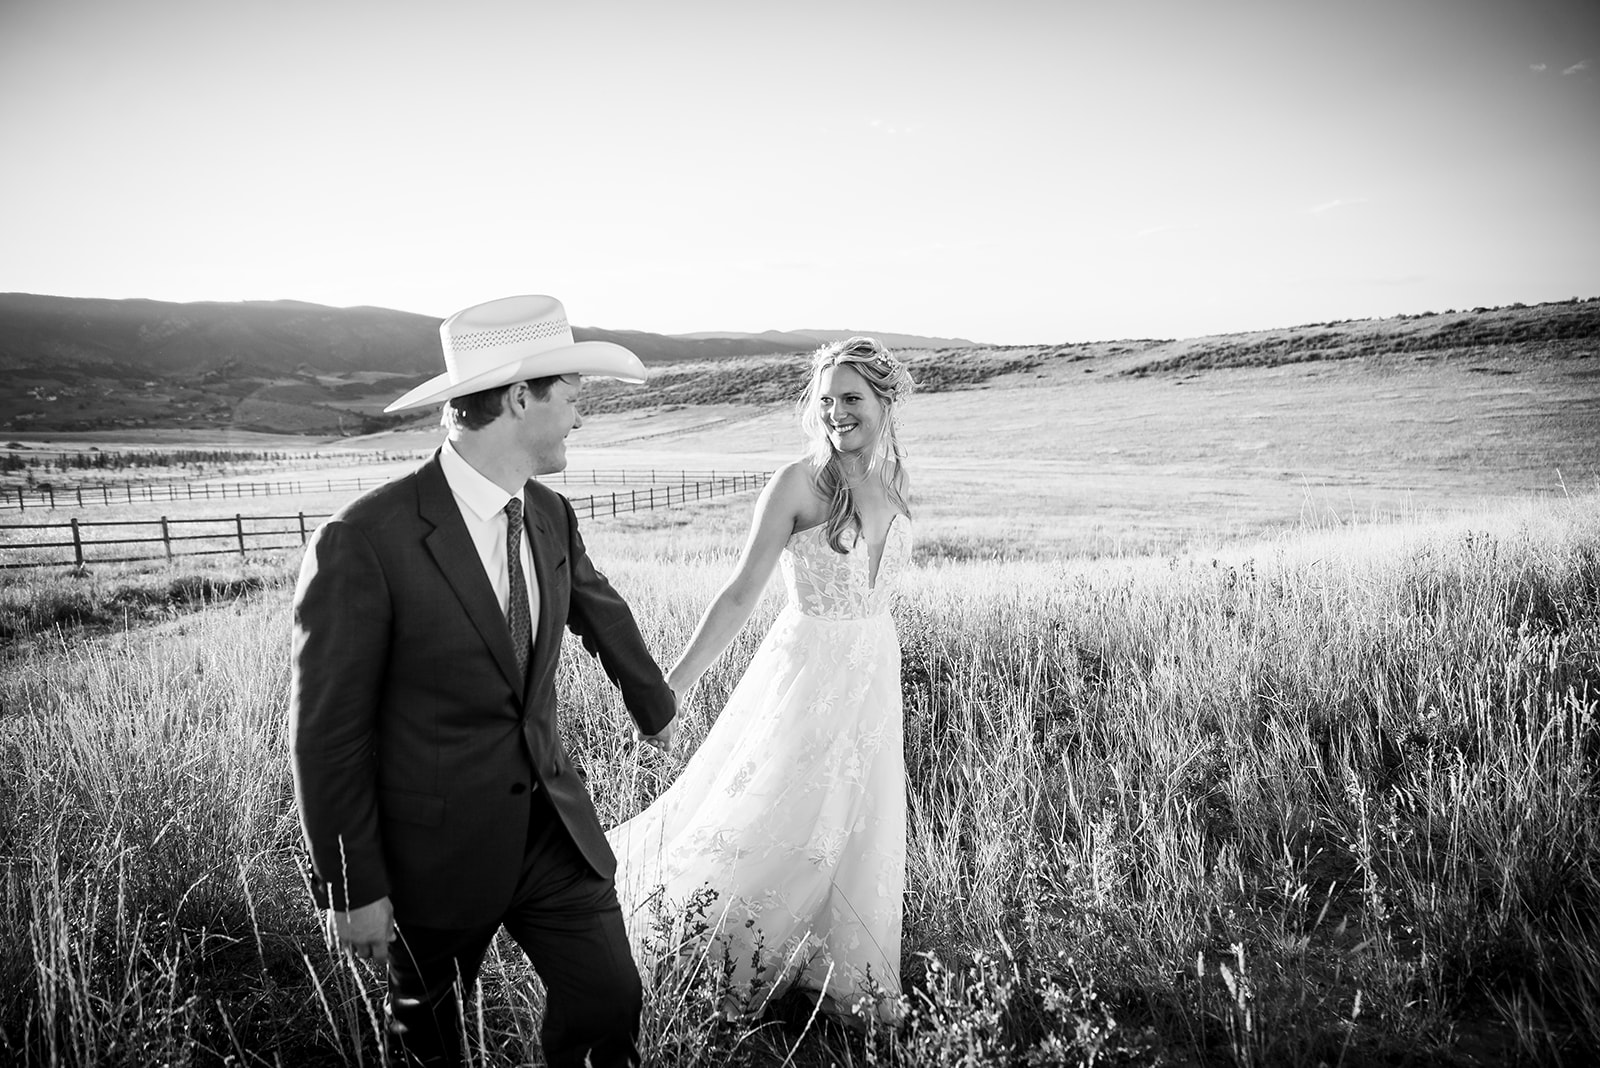 Bride and groom walk through a field hand-in hand looking into each other's eyes.